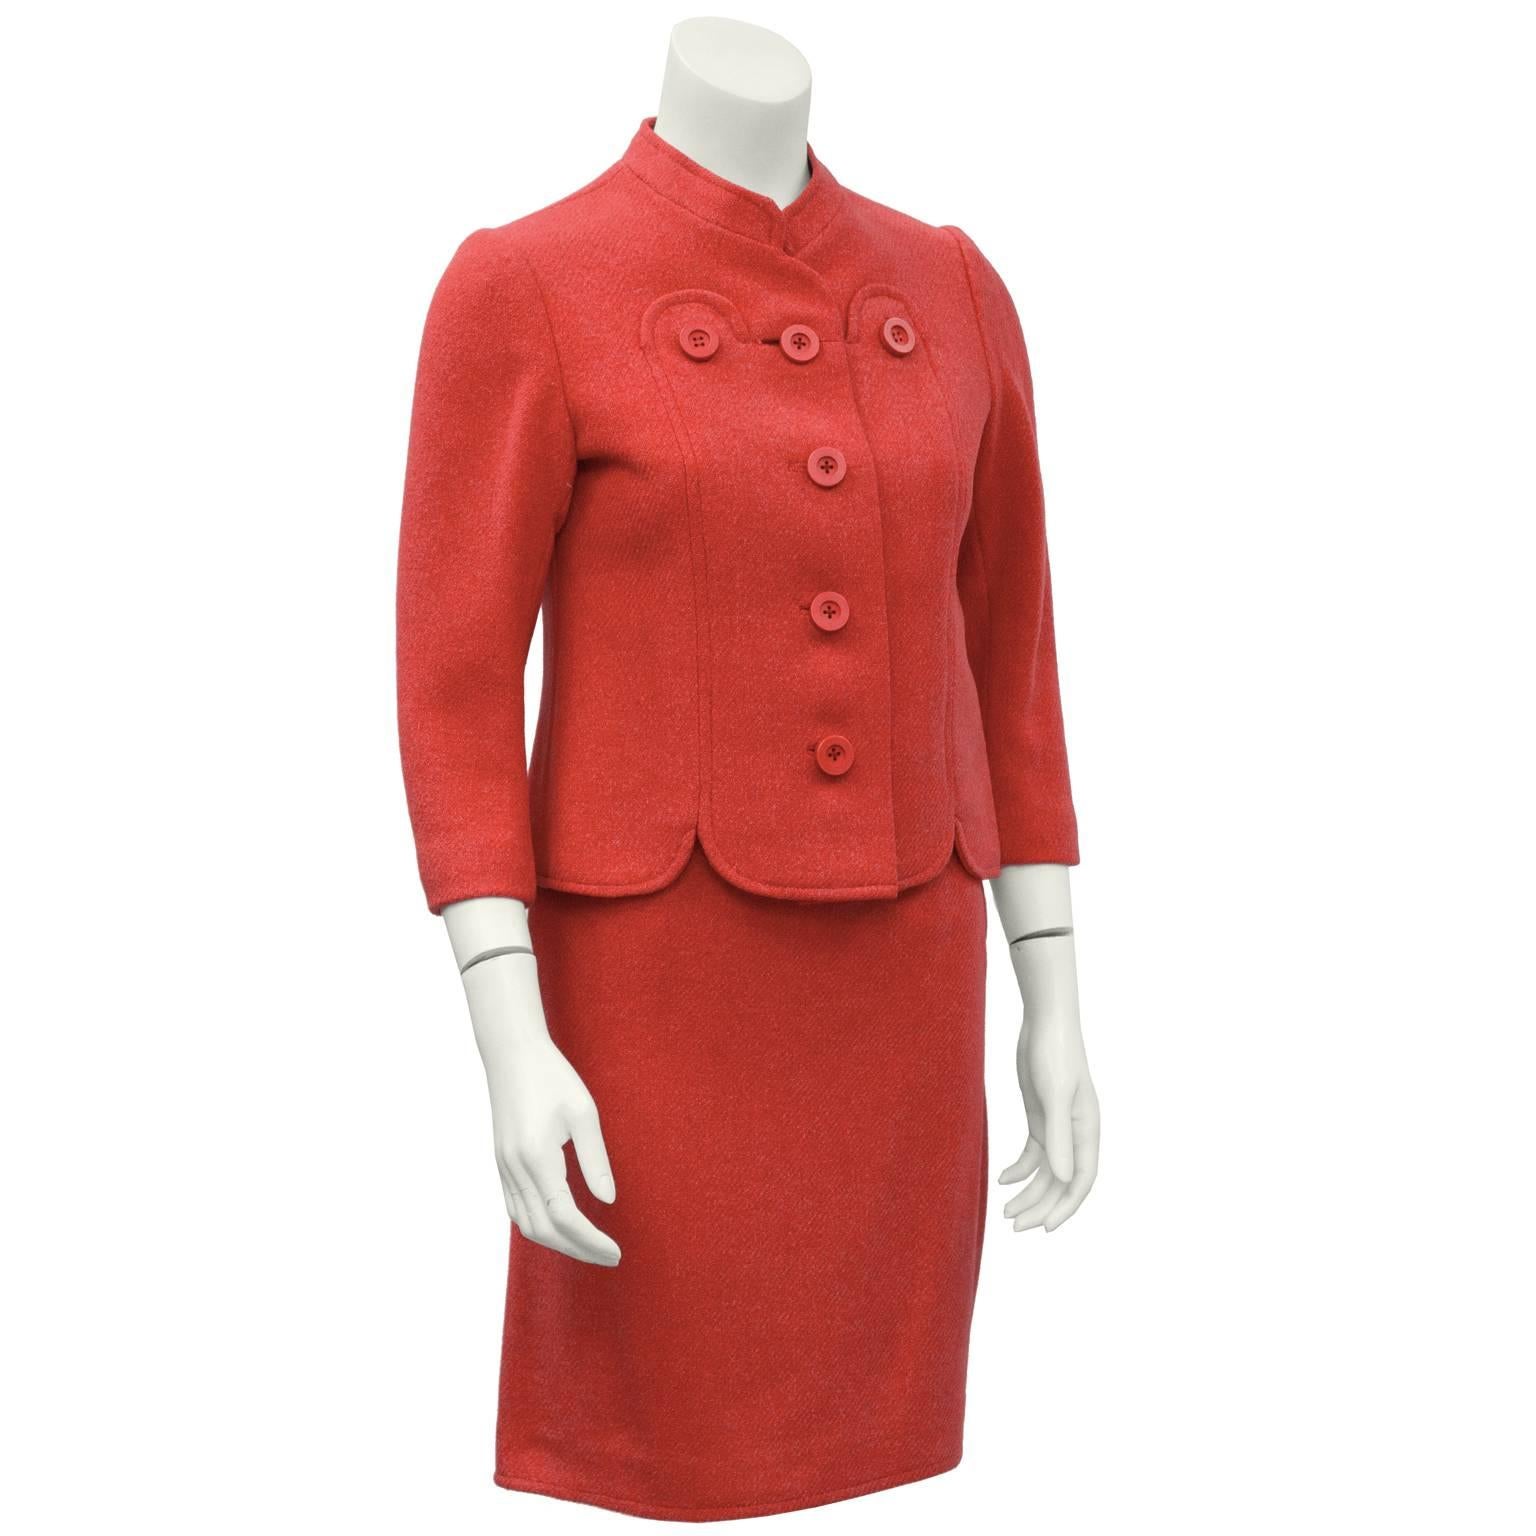 Adorable coral suit by the designer Molyneux from the 1960’s. The fitted jacket has a mandarin style collar and fastens up the front with large matching plastic coral buttons. The scallop edge detail on the front of the jacket, mirrored on the hem,